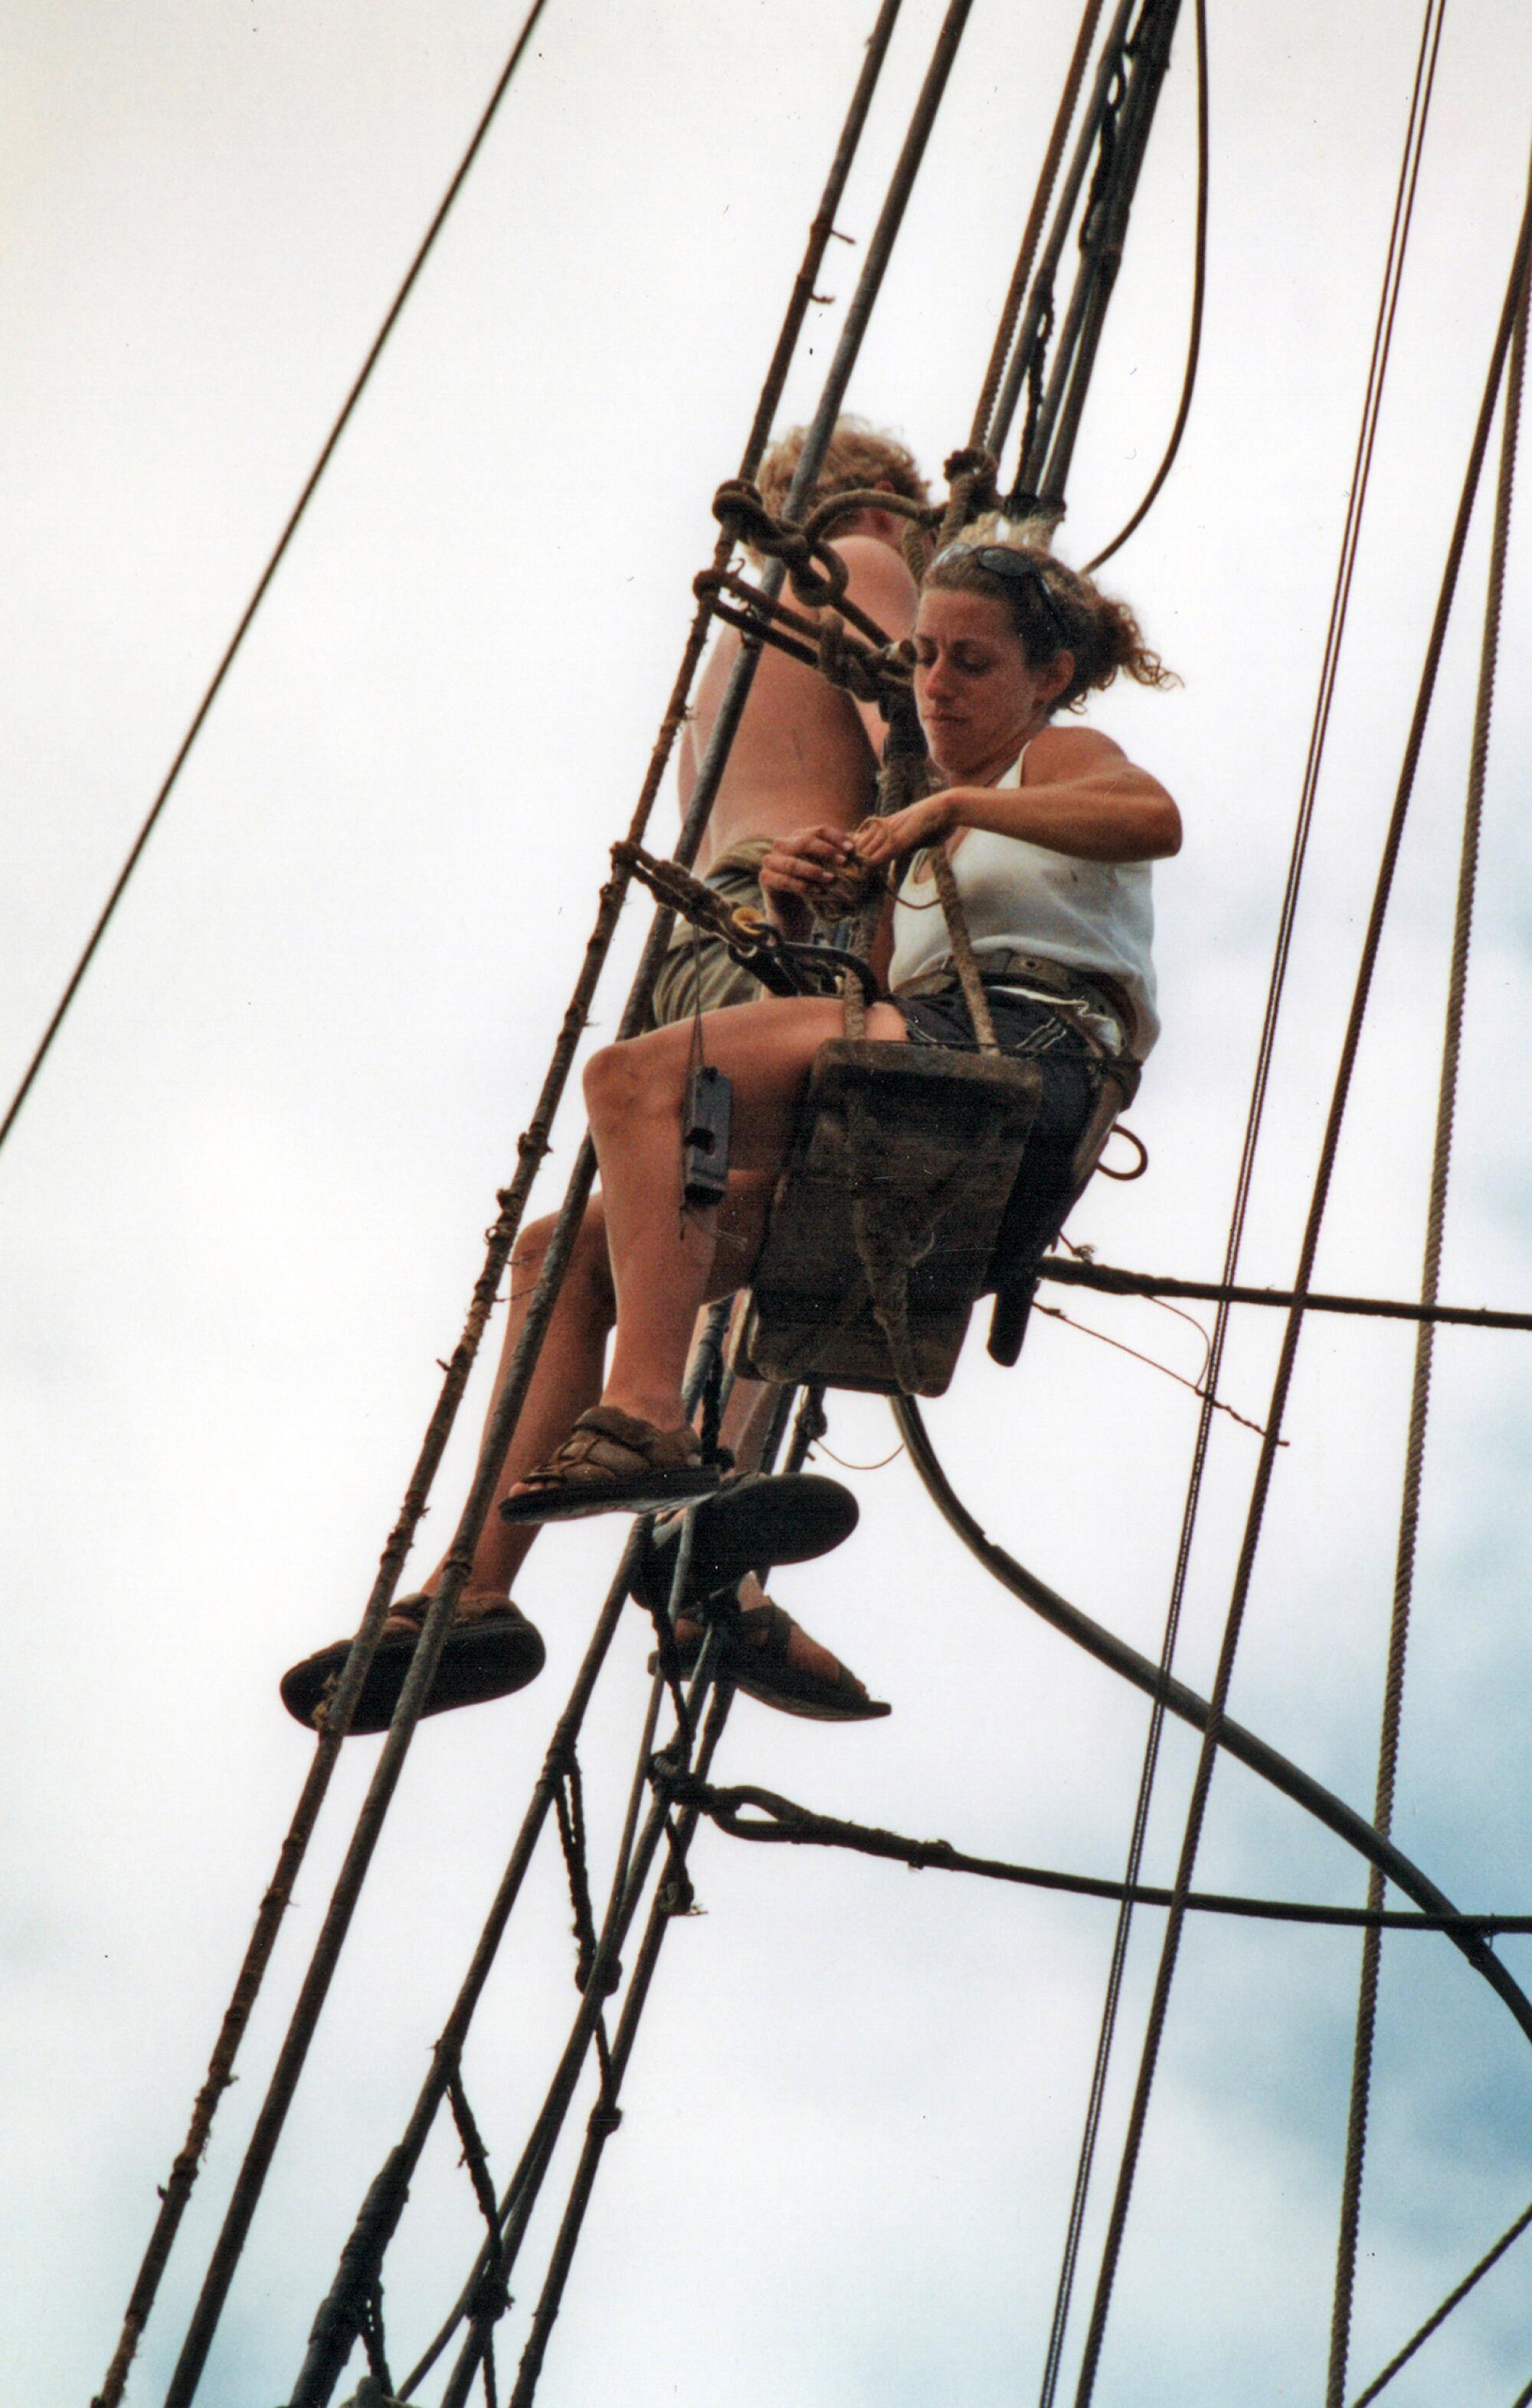 Crew members high in the ship's rigging.